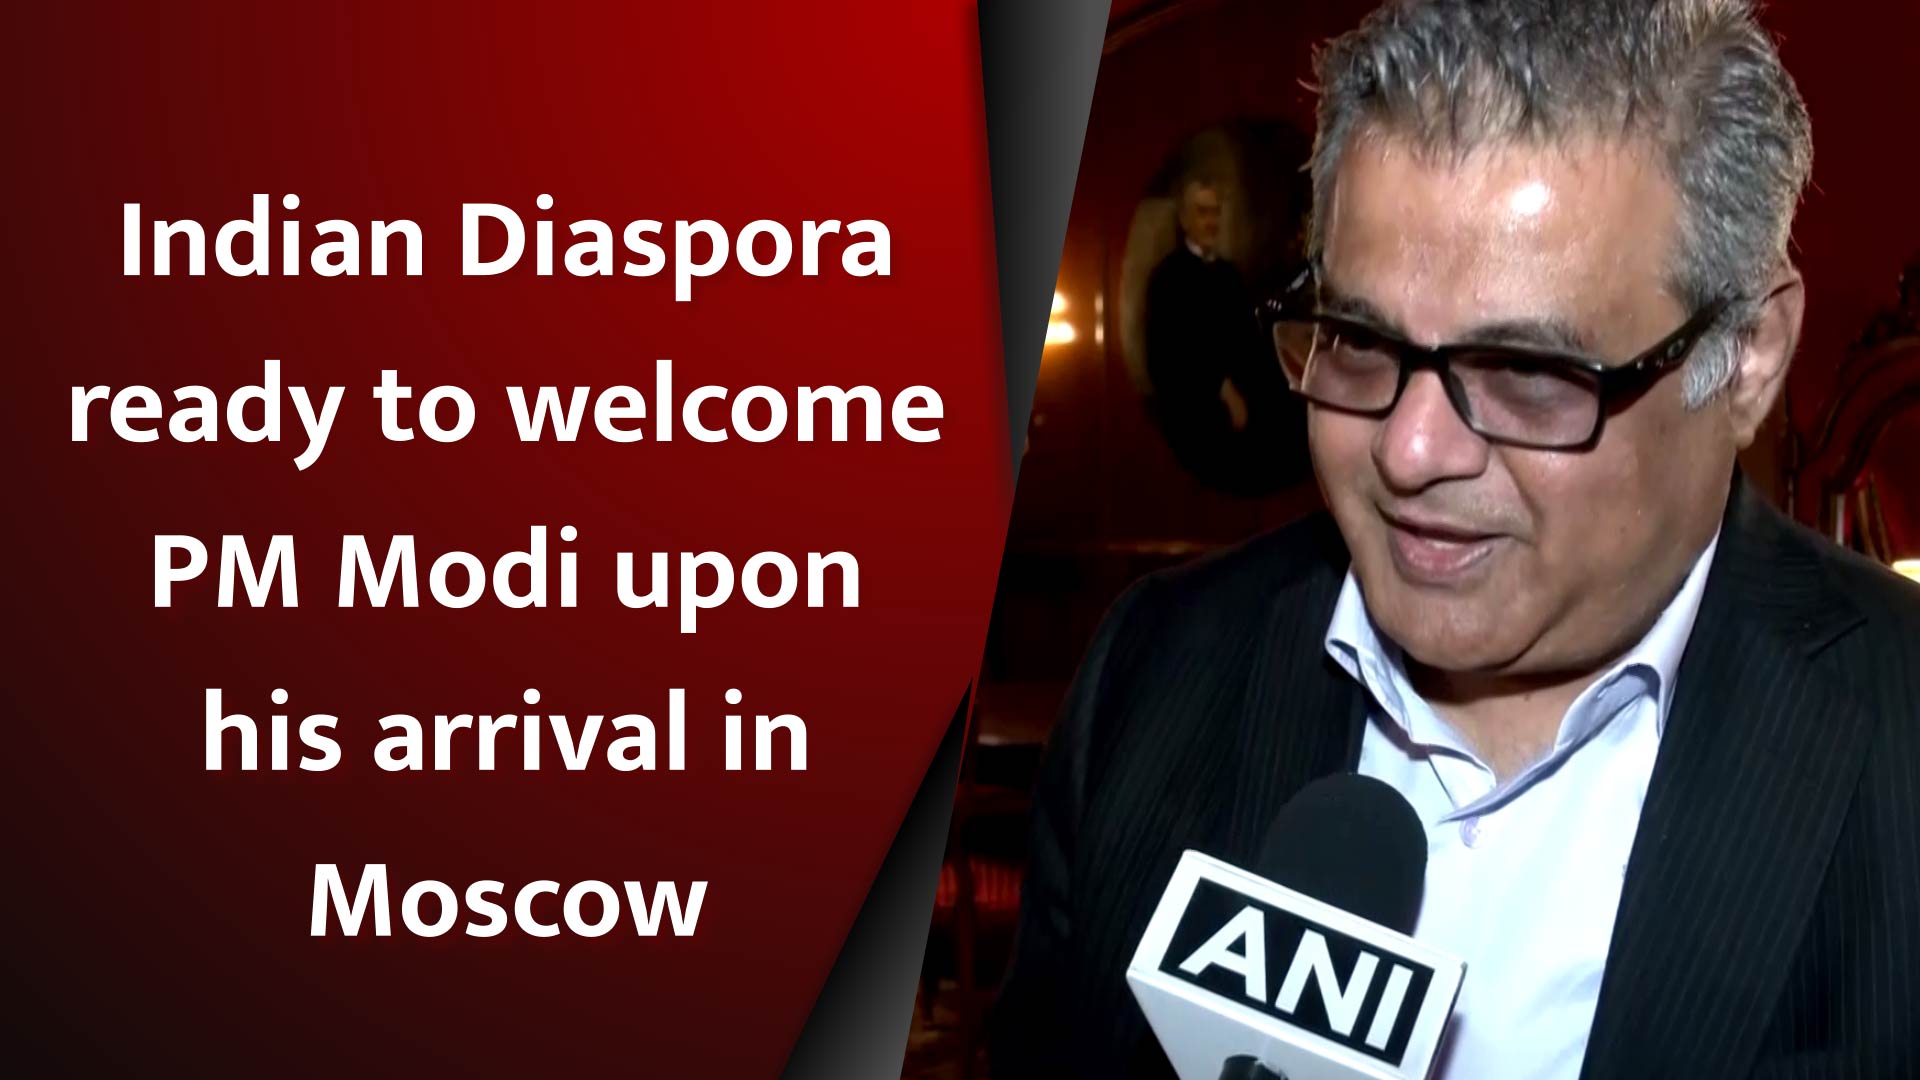 Indian Diaspora ready to welcome PM Modi upon his arrival in Moscow